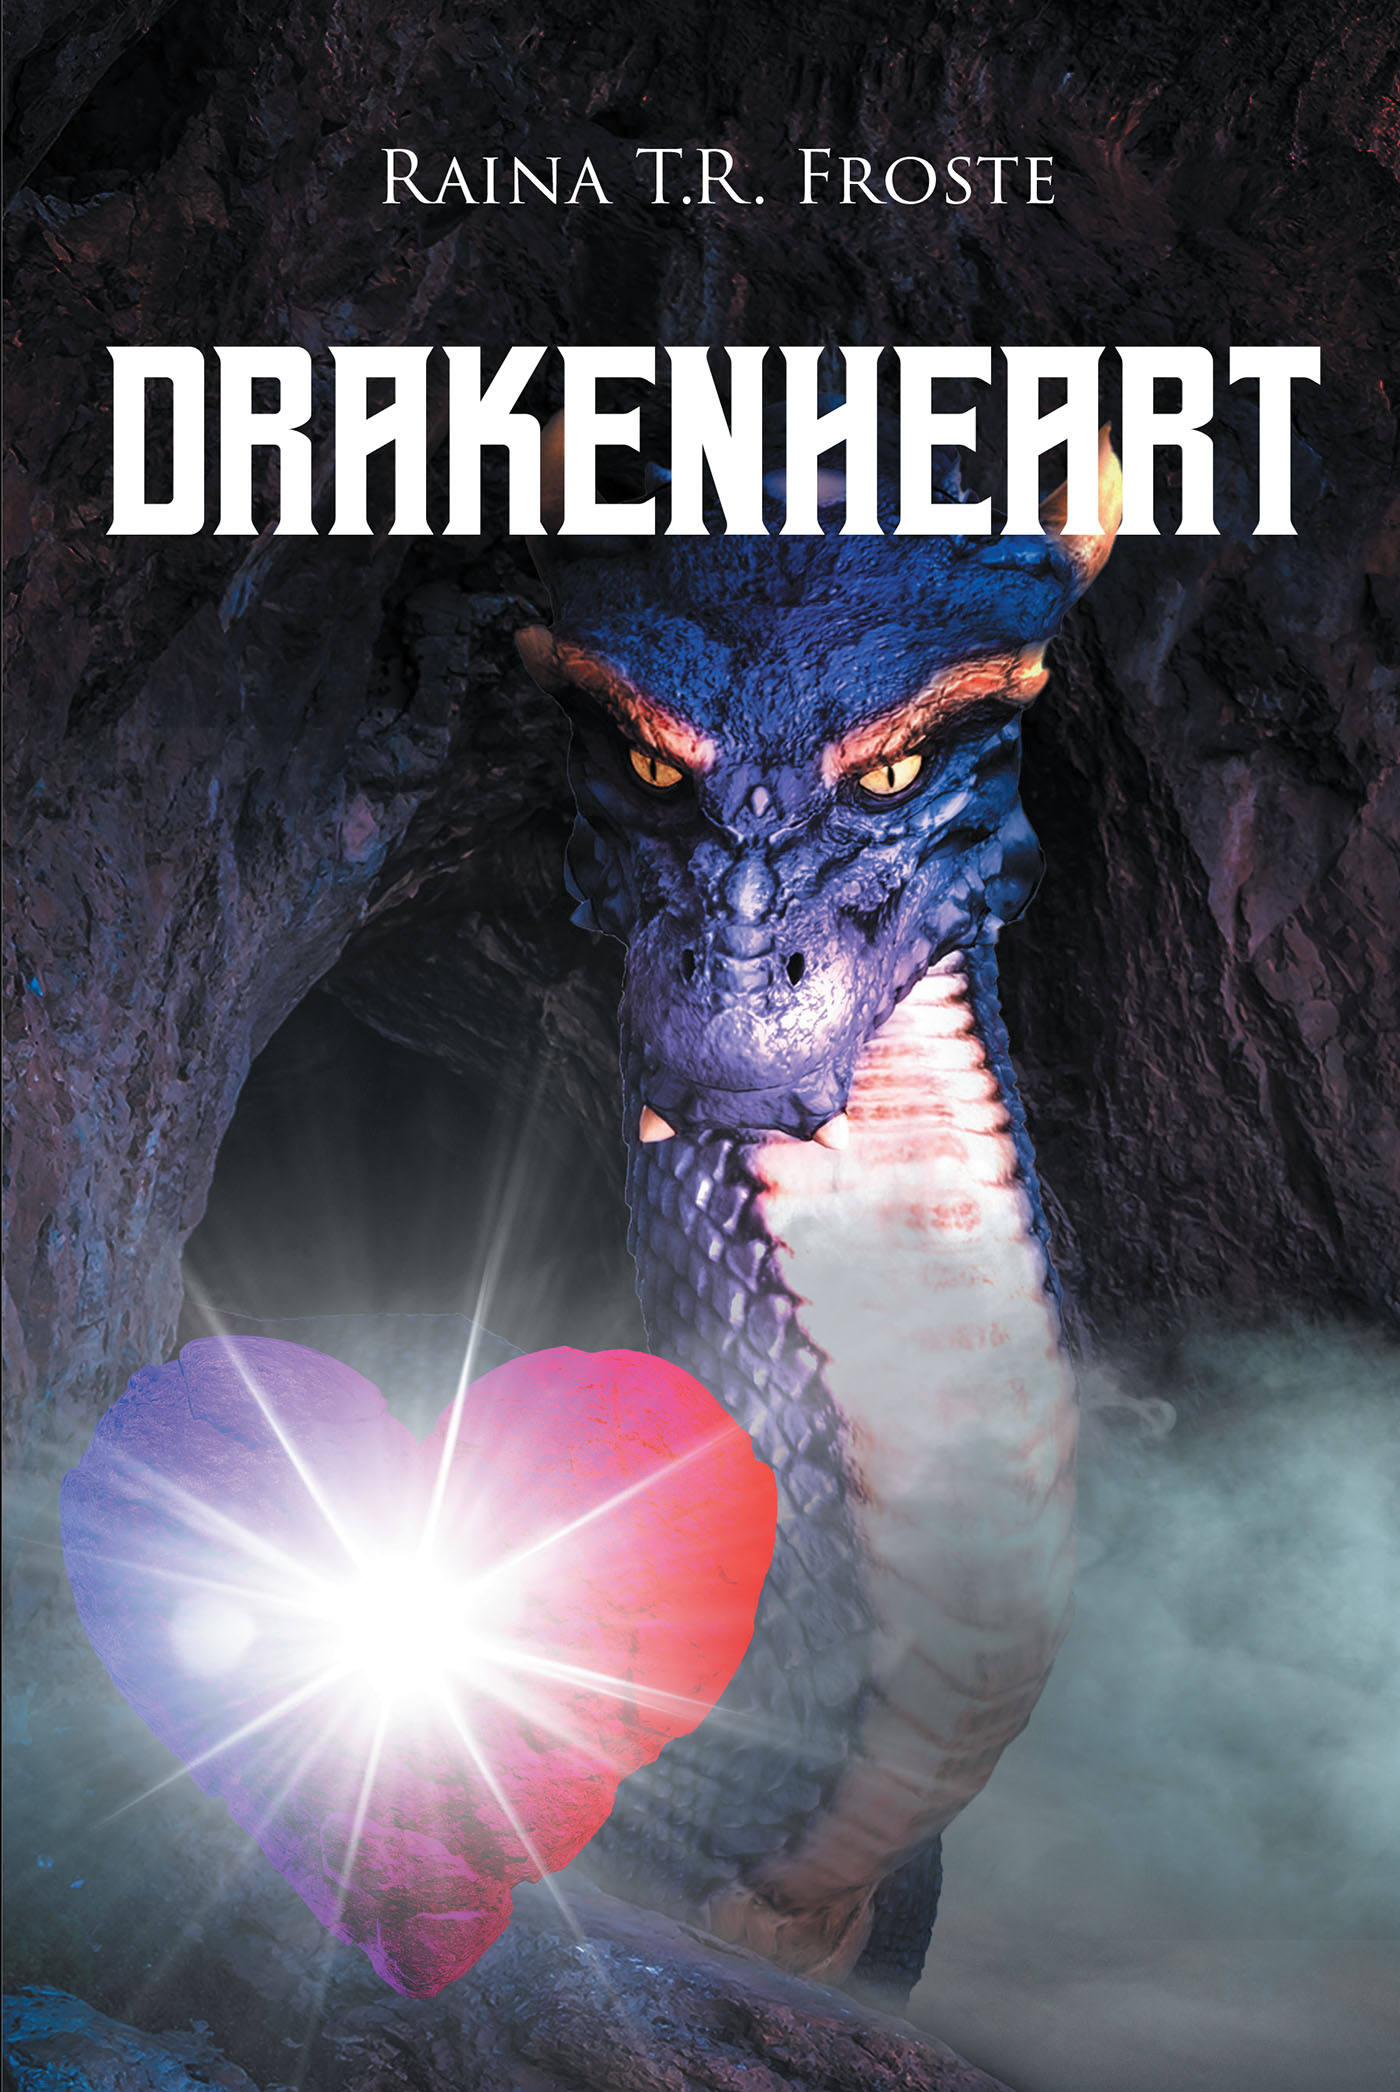 Author Raina T.R. Froste’s New Book, “Drakenheart,” is a Riveting Coming-of-Age Story Following a High School Student as She Discovers a Secret World of Magic and Sorcery